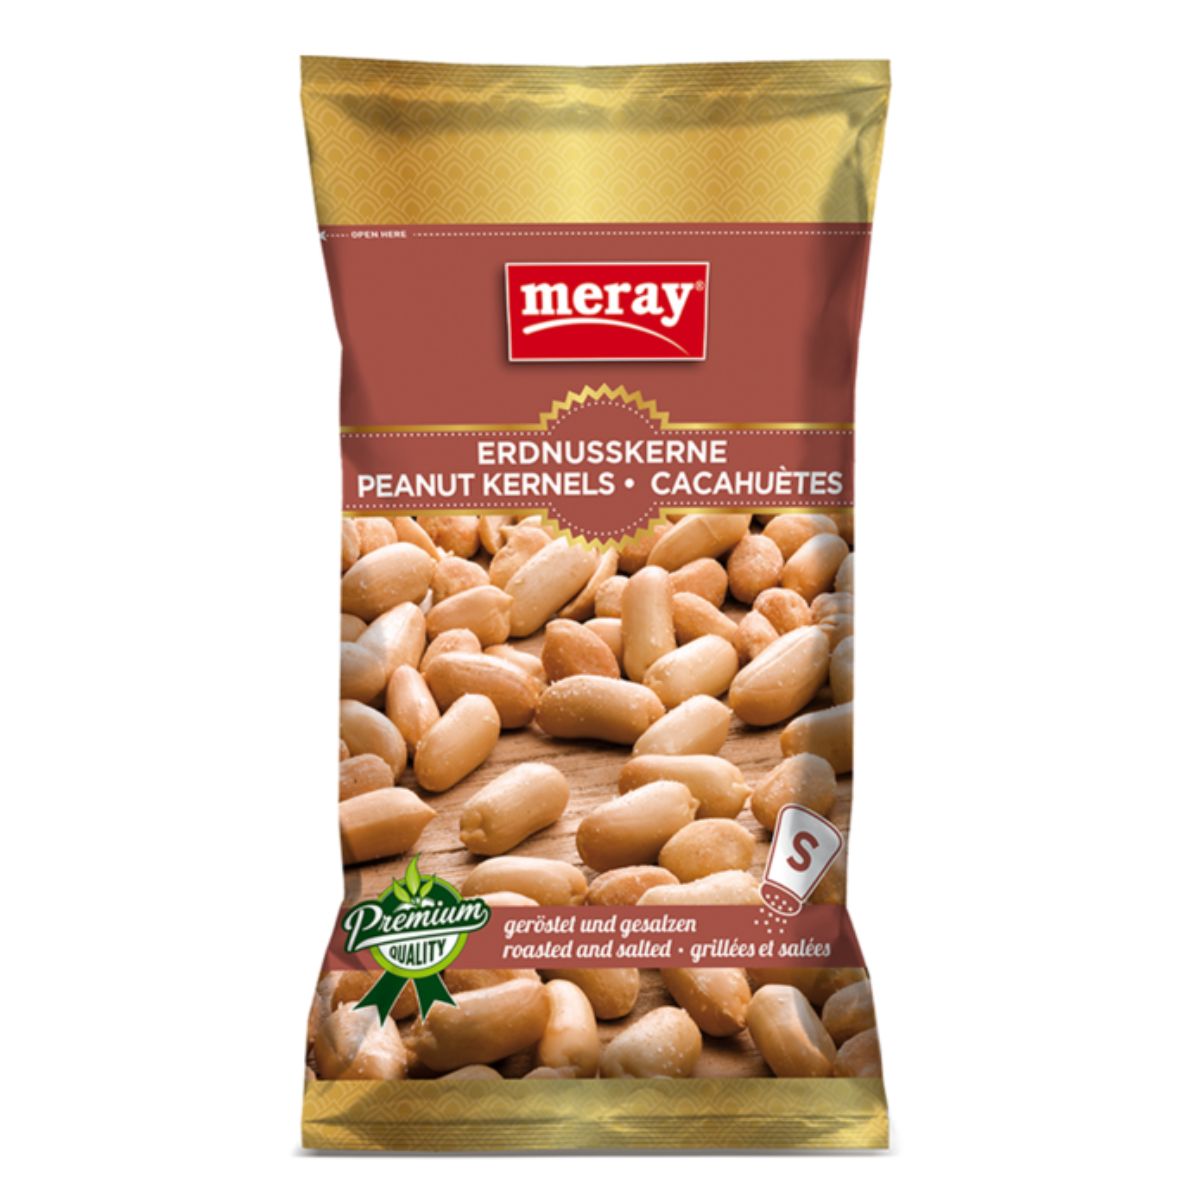 A bag of Meray - Peanut Kernels - 150g on a white background.